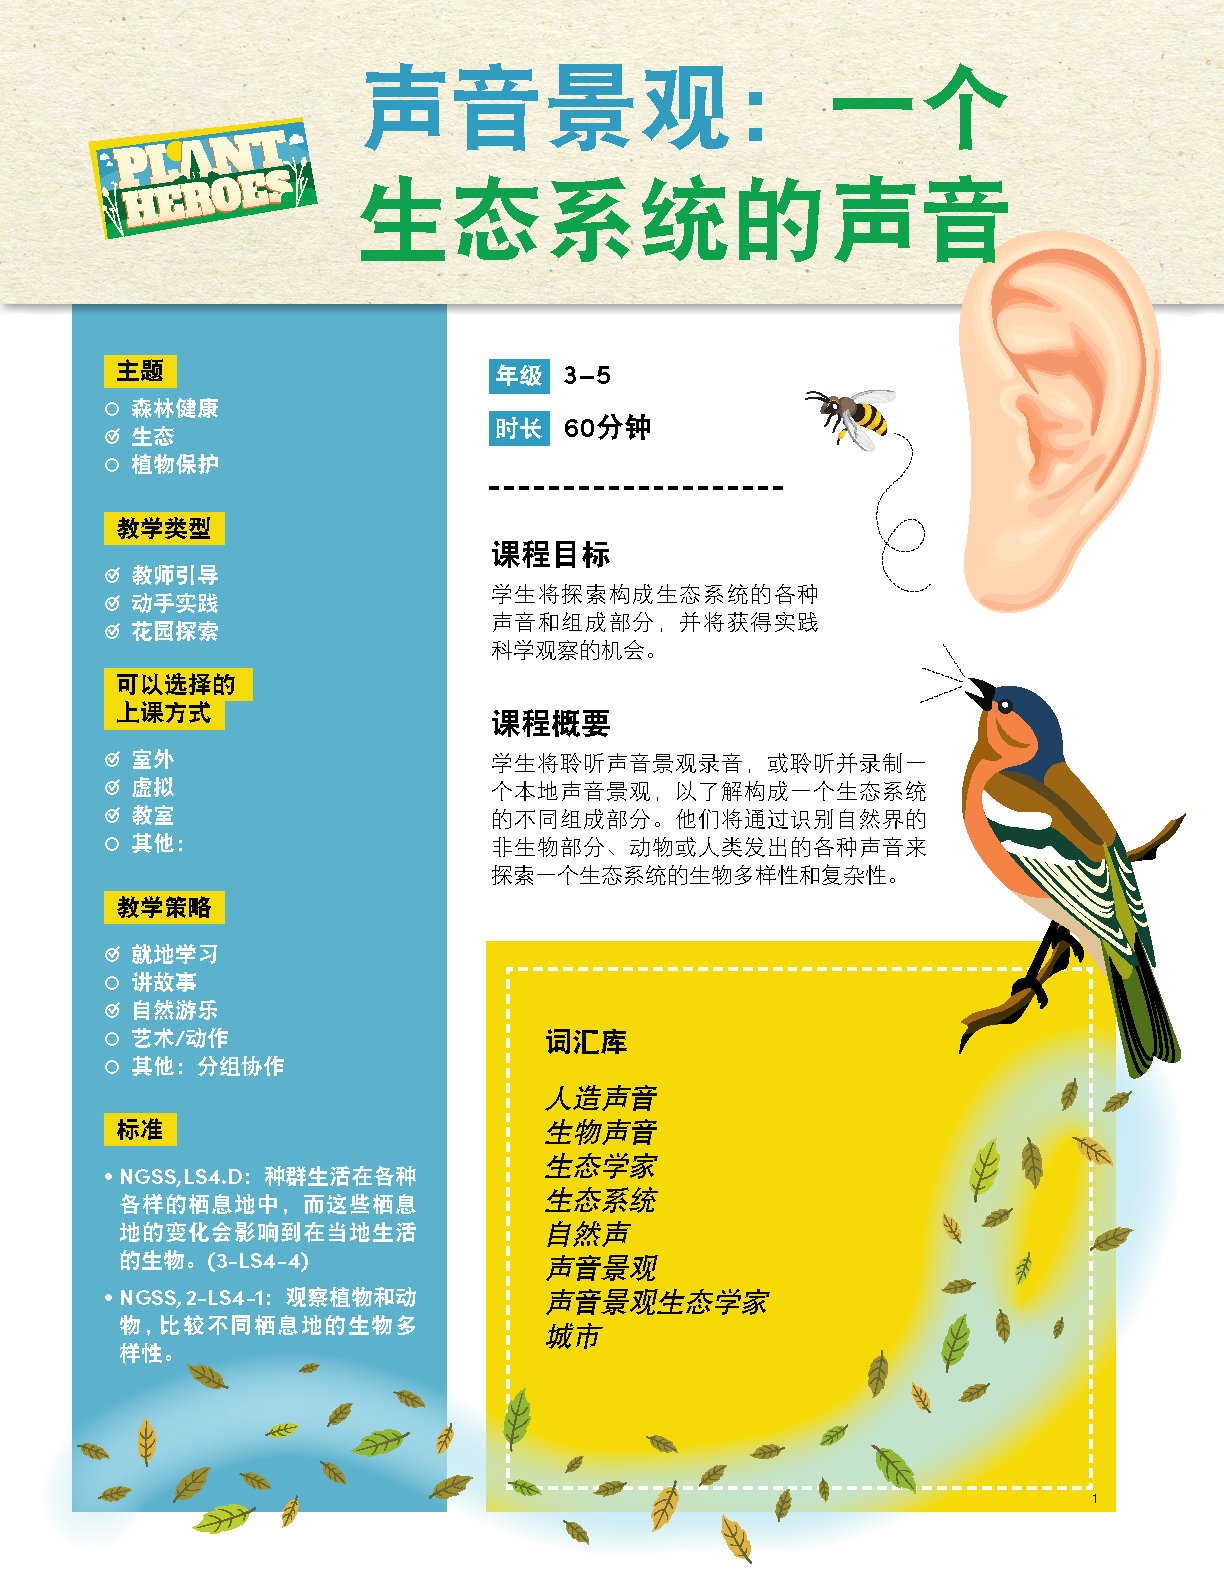 front page of the soundscapes lesson in Chinese.